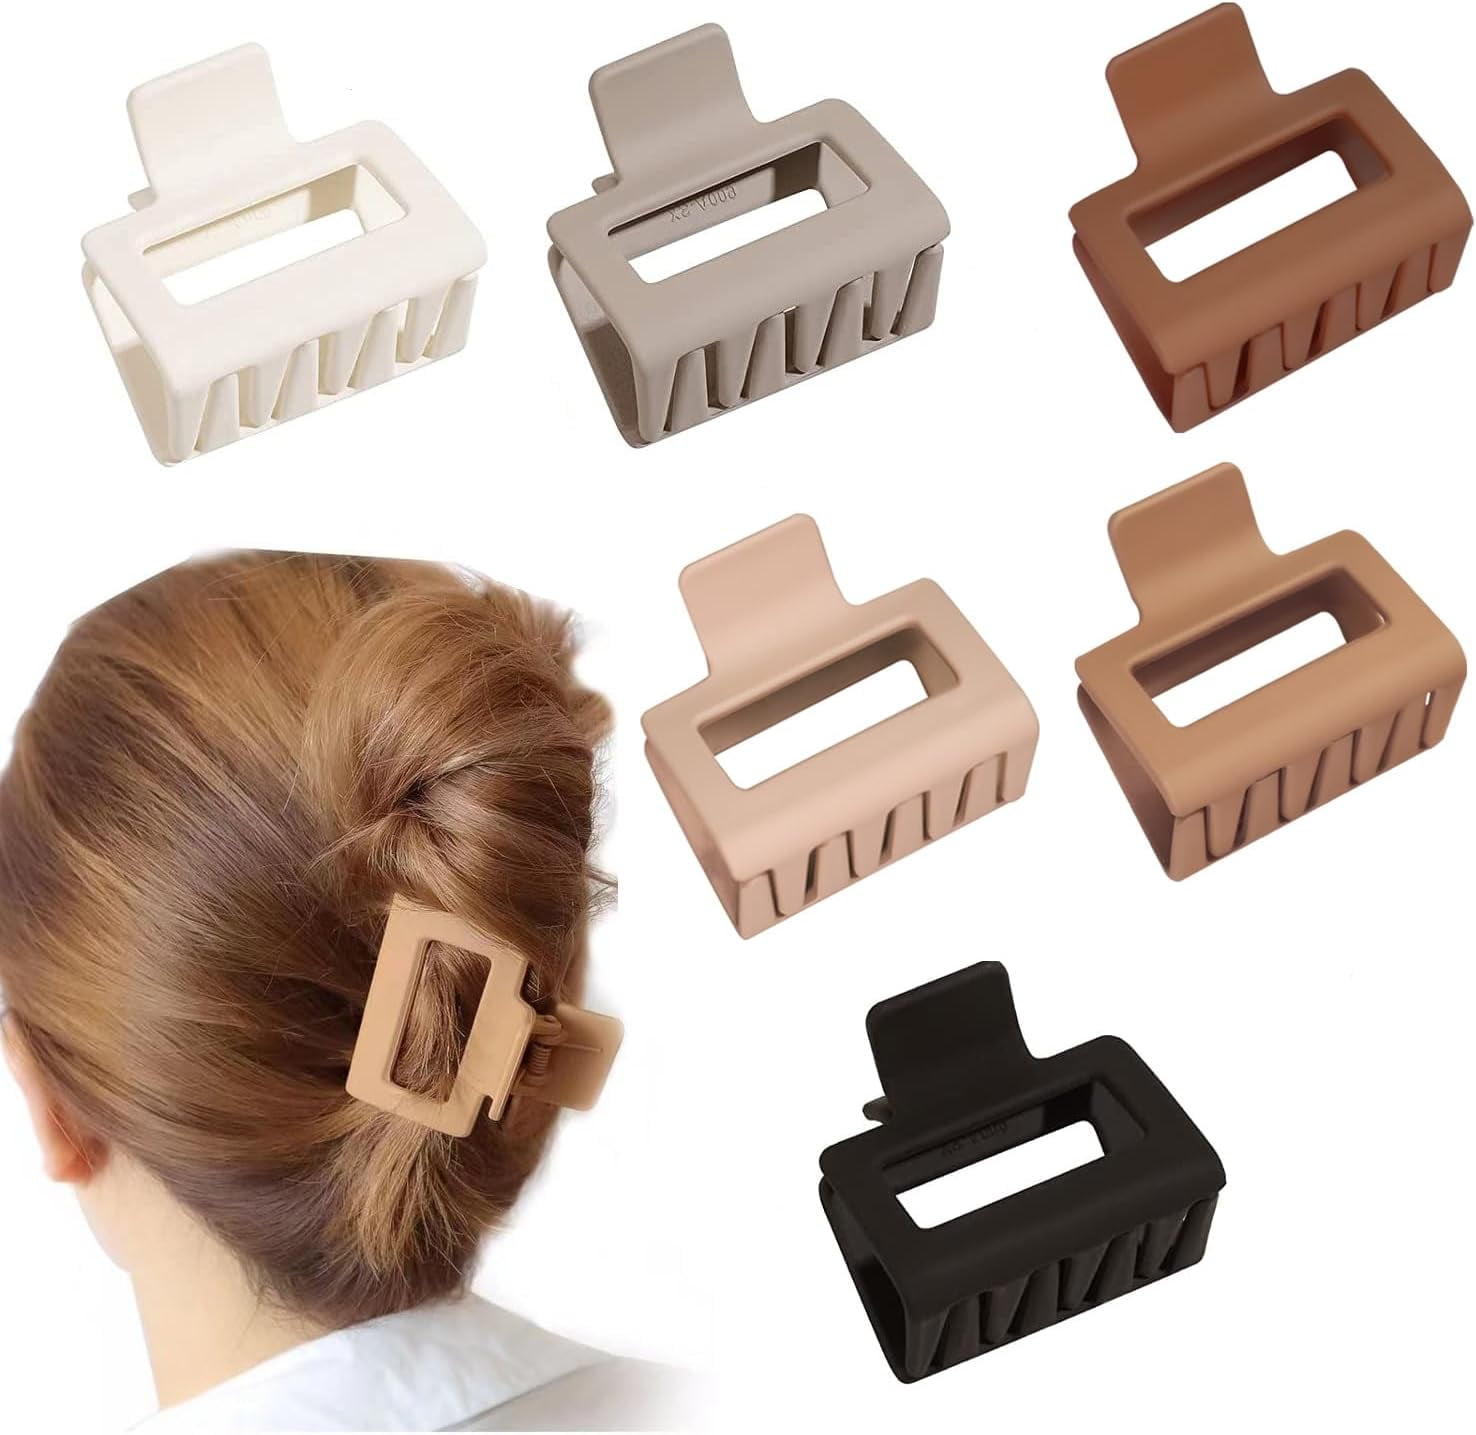  2.75 Large Bobby Pins Brown 240PCS Extra Long Bobby Pins for  Thick Hair Waved Hair Pin for Styling with Box : Beauty & Personal Care